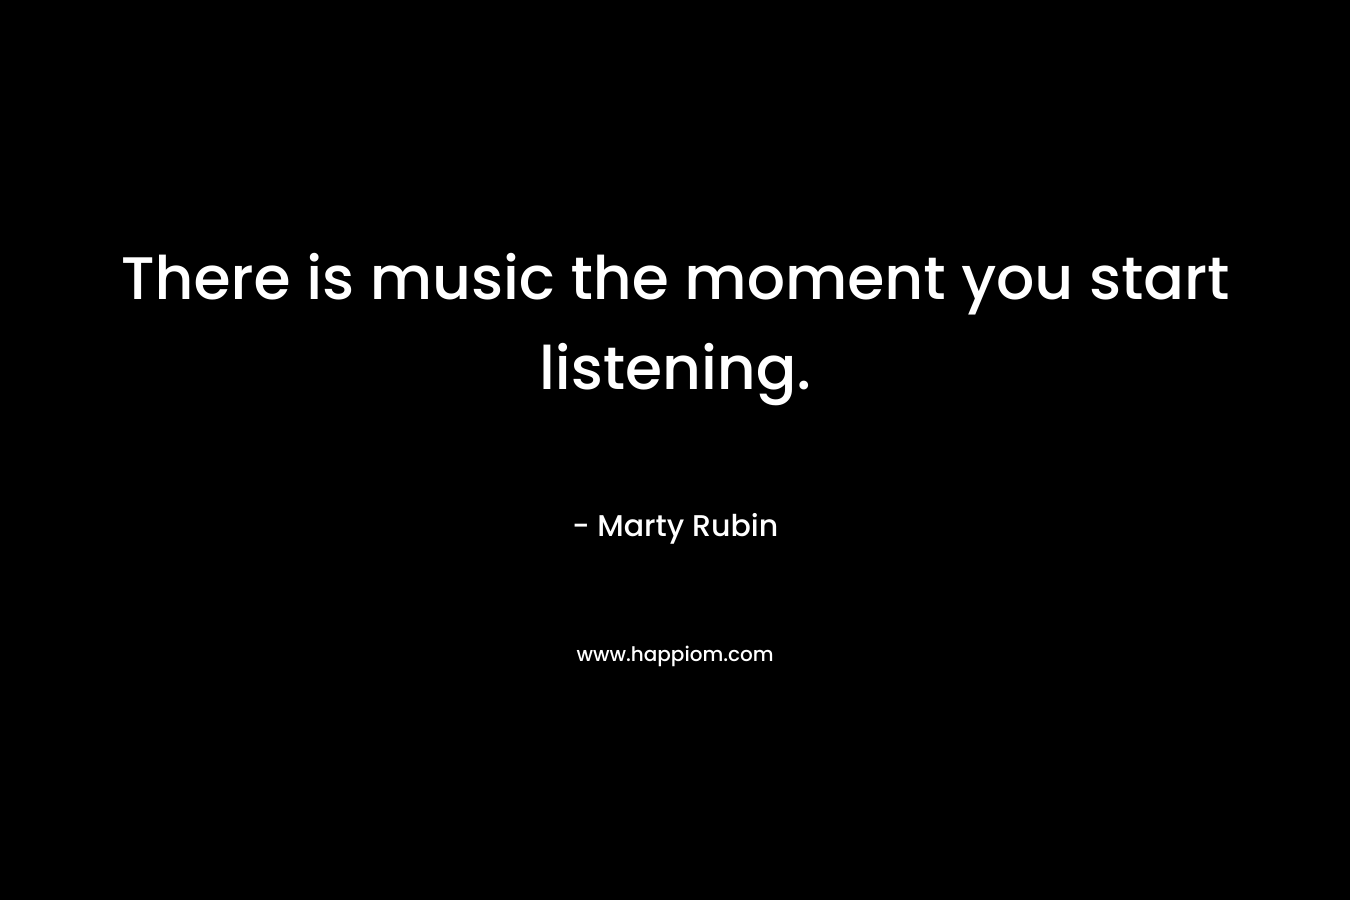 There is music the moment you start listening.